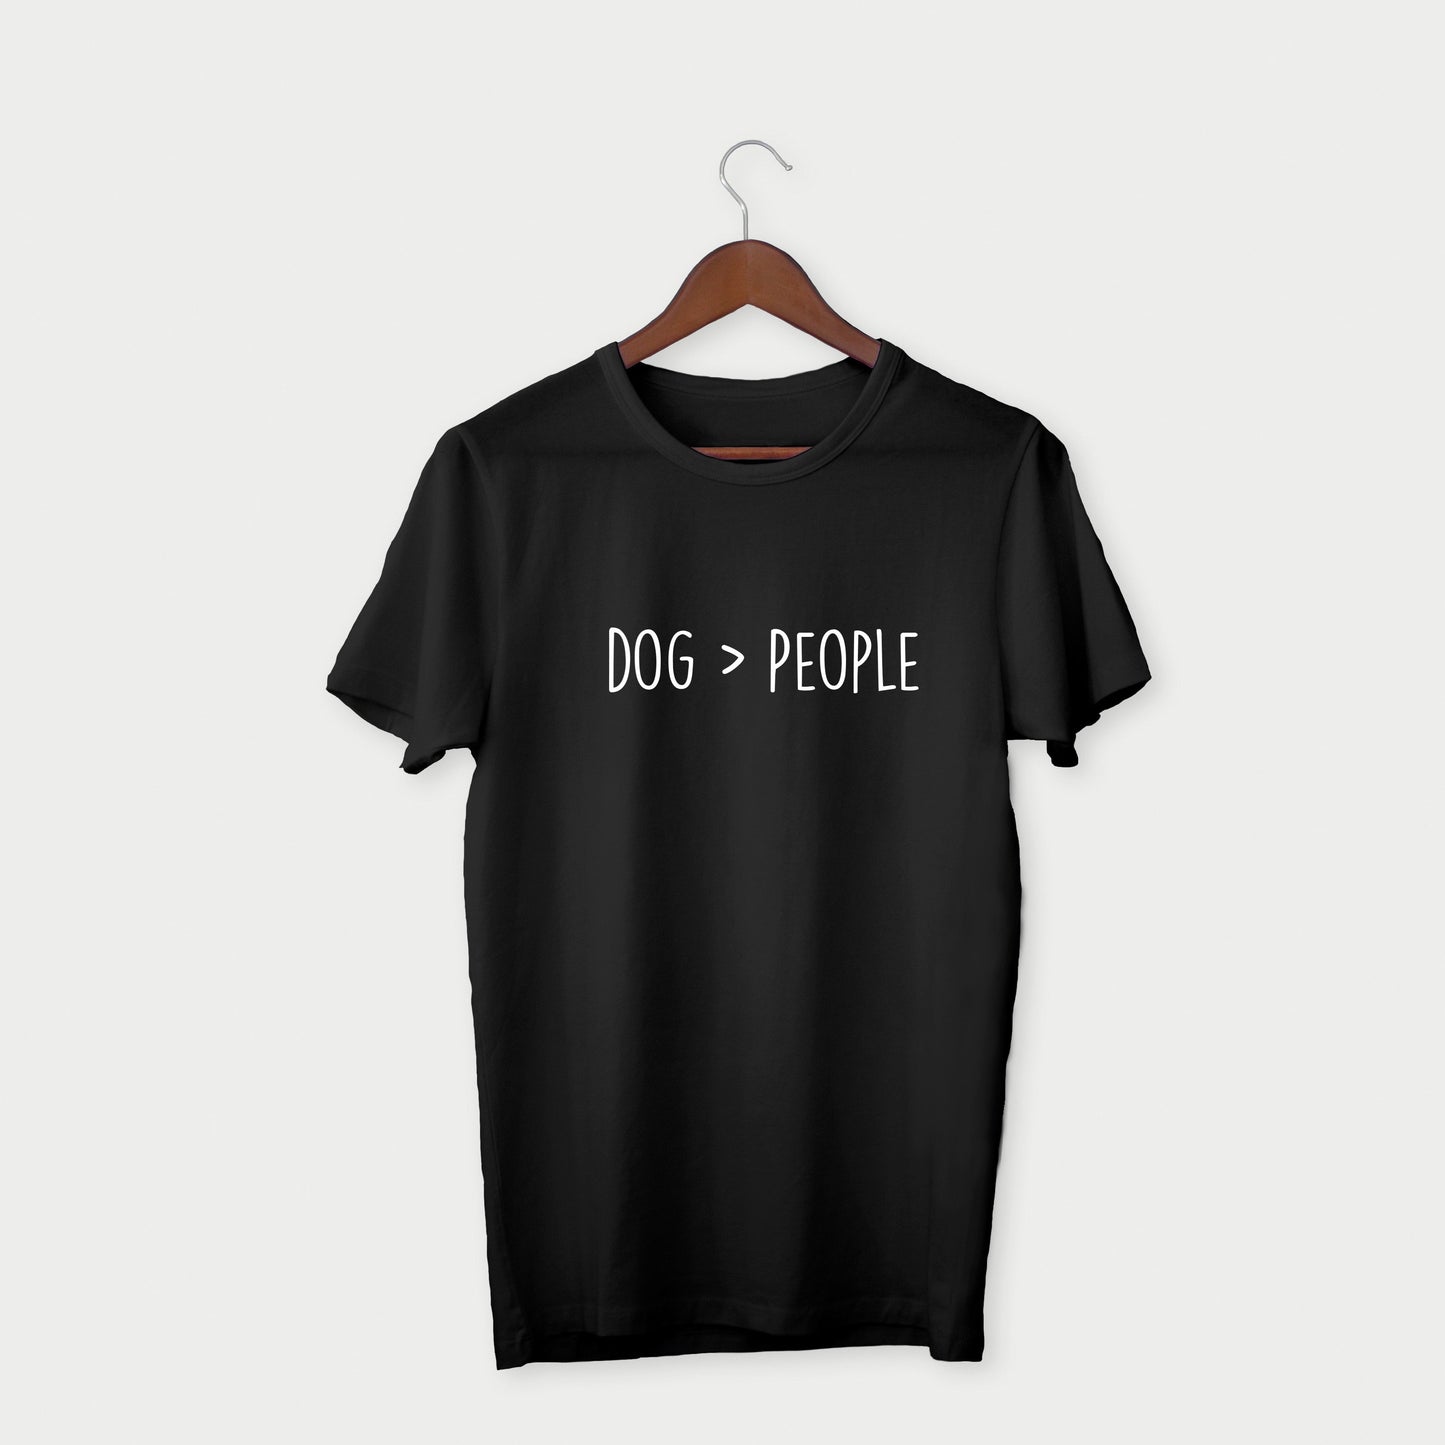 "Dogs > People" T-shirt